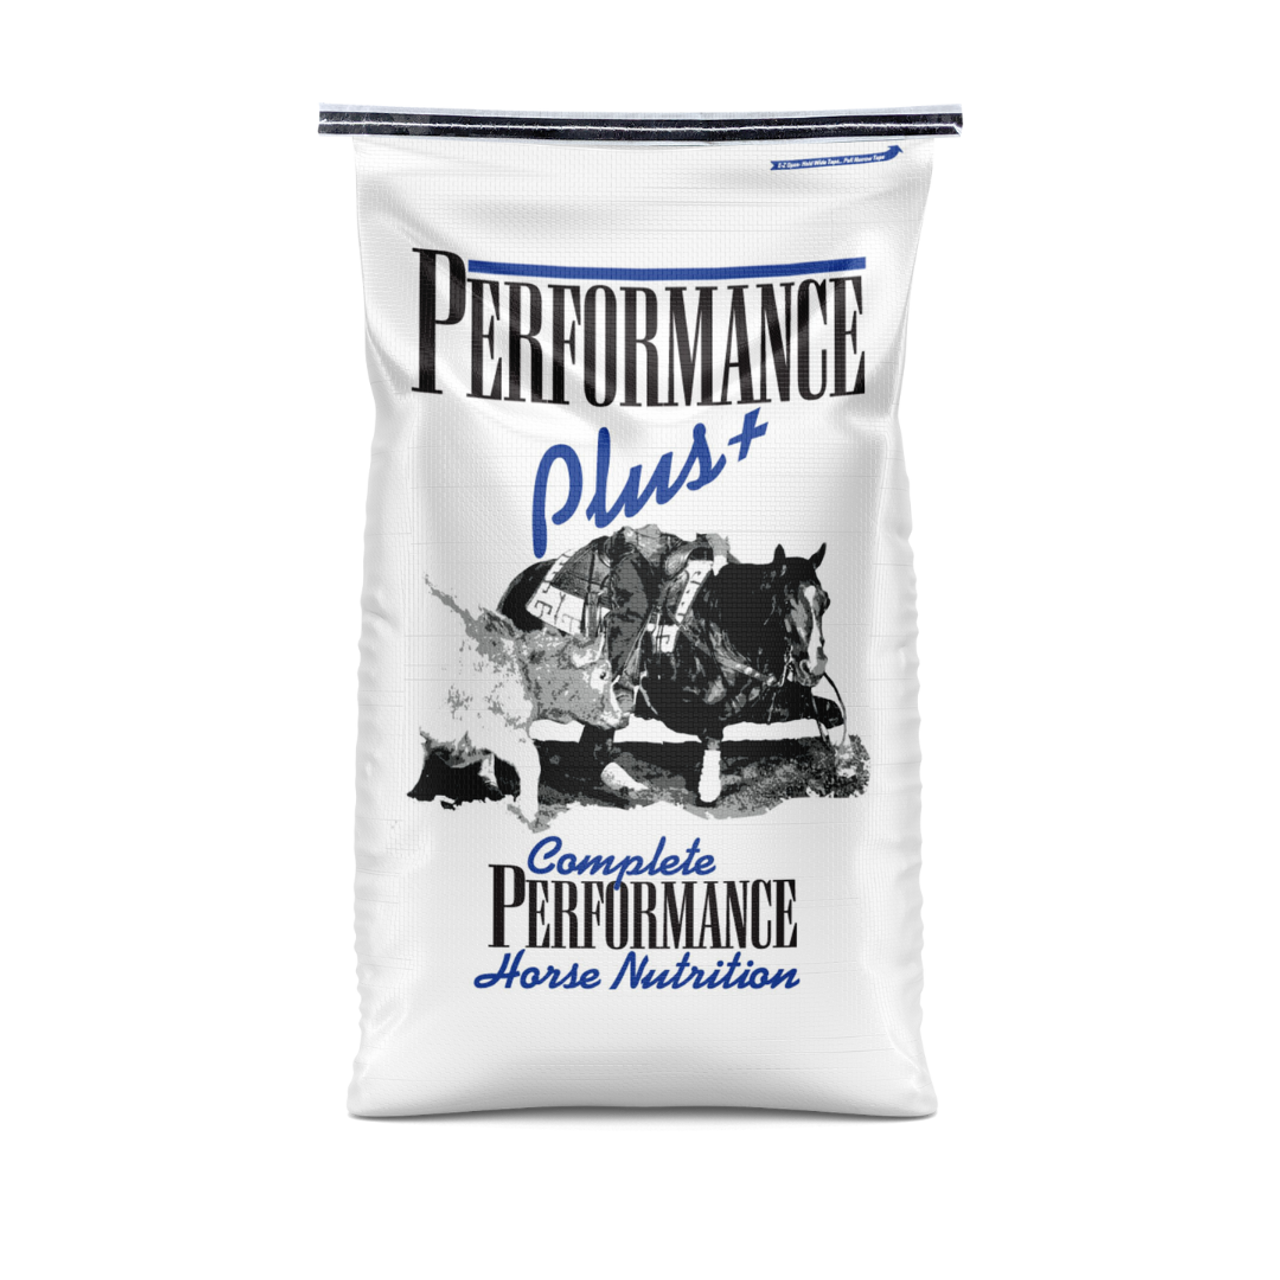 Performance Plus Products